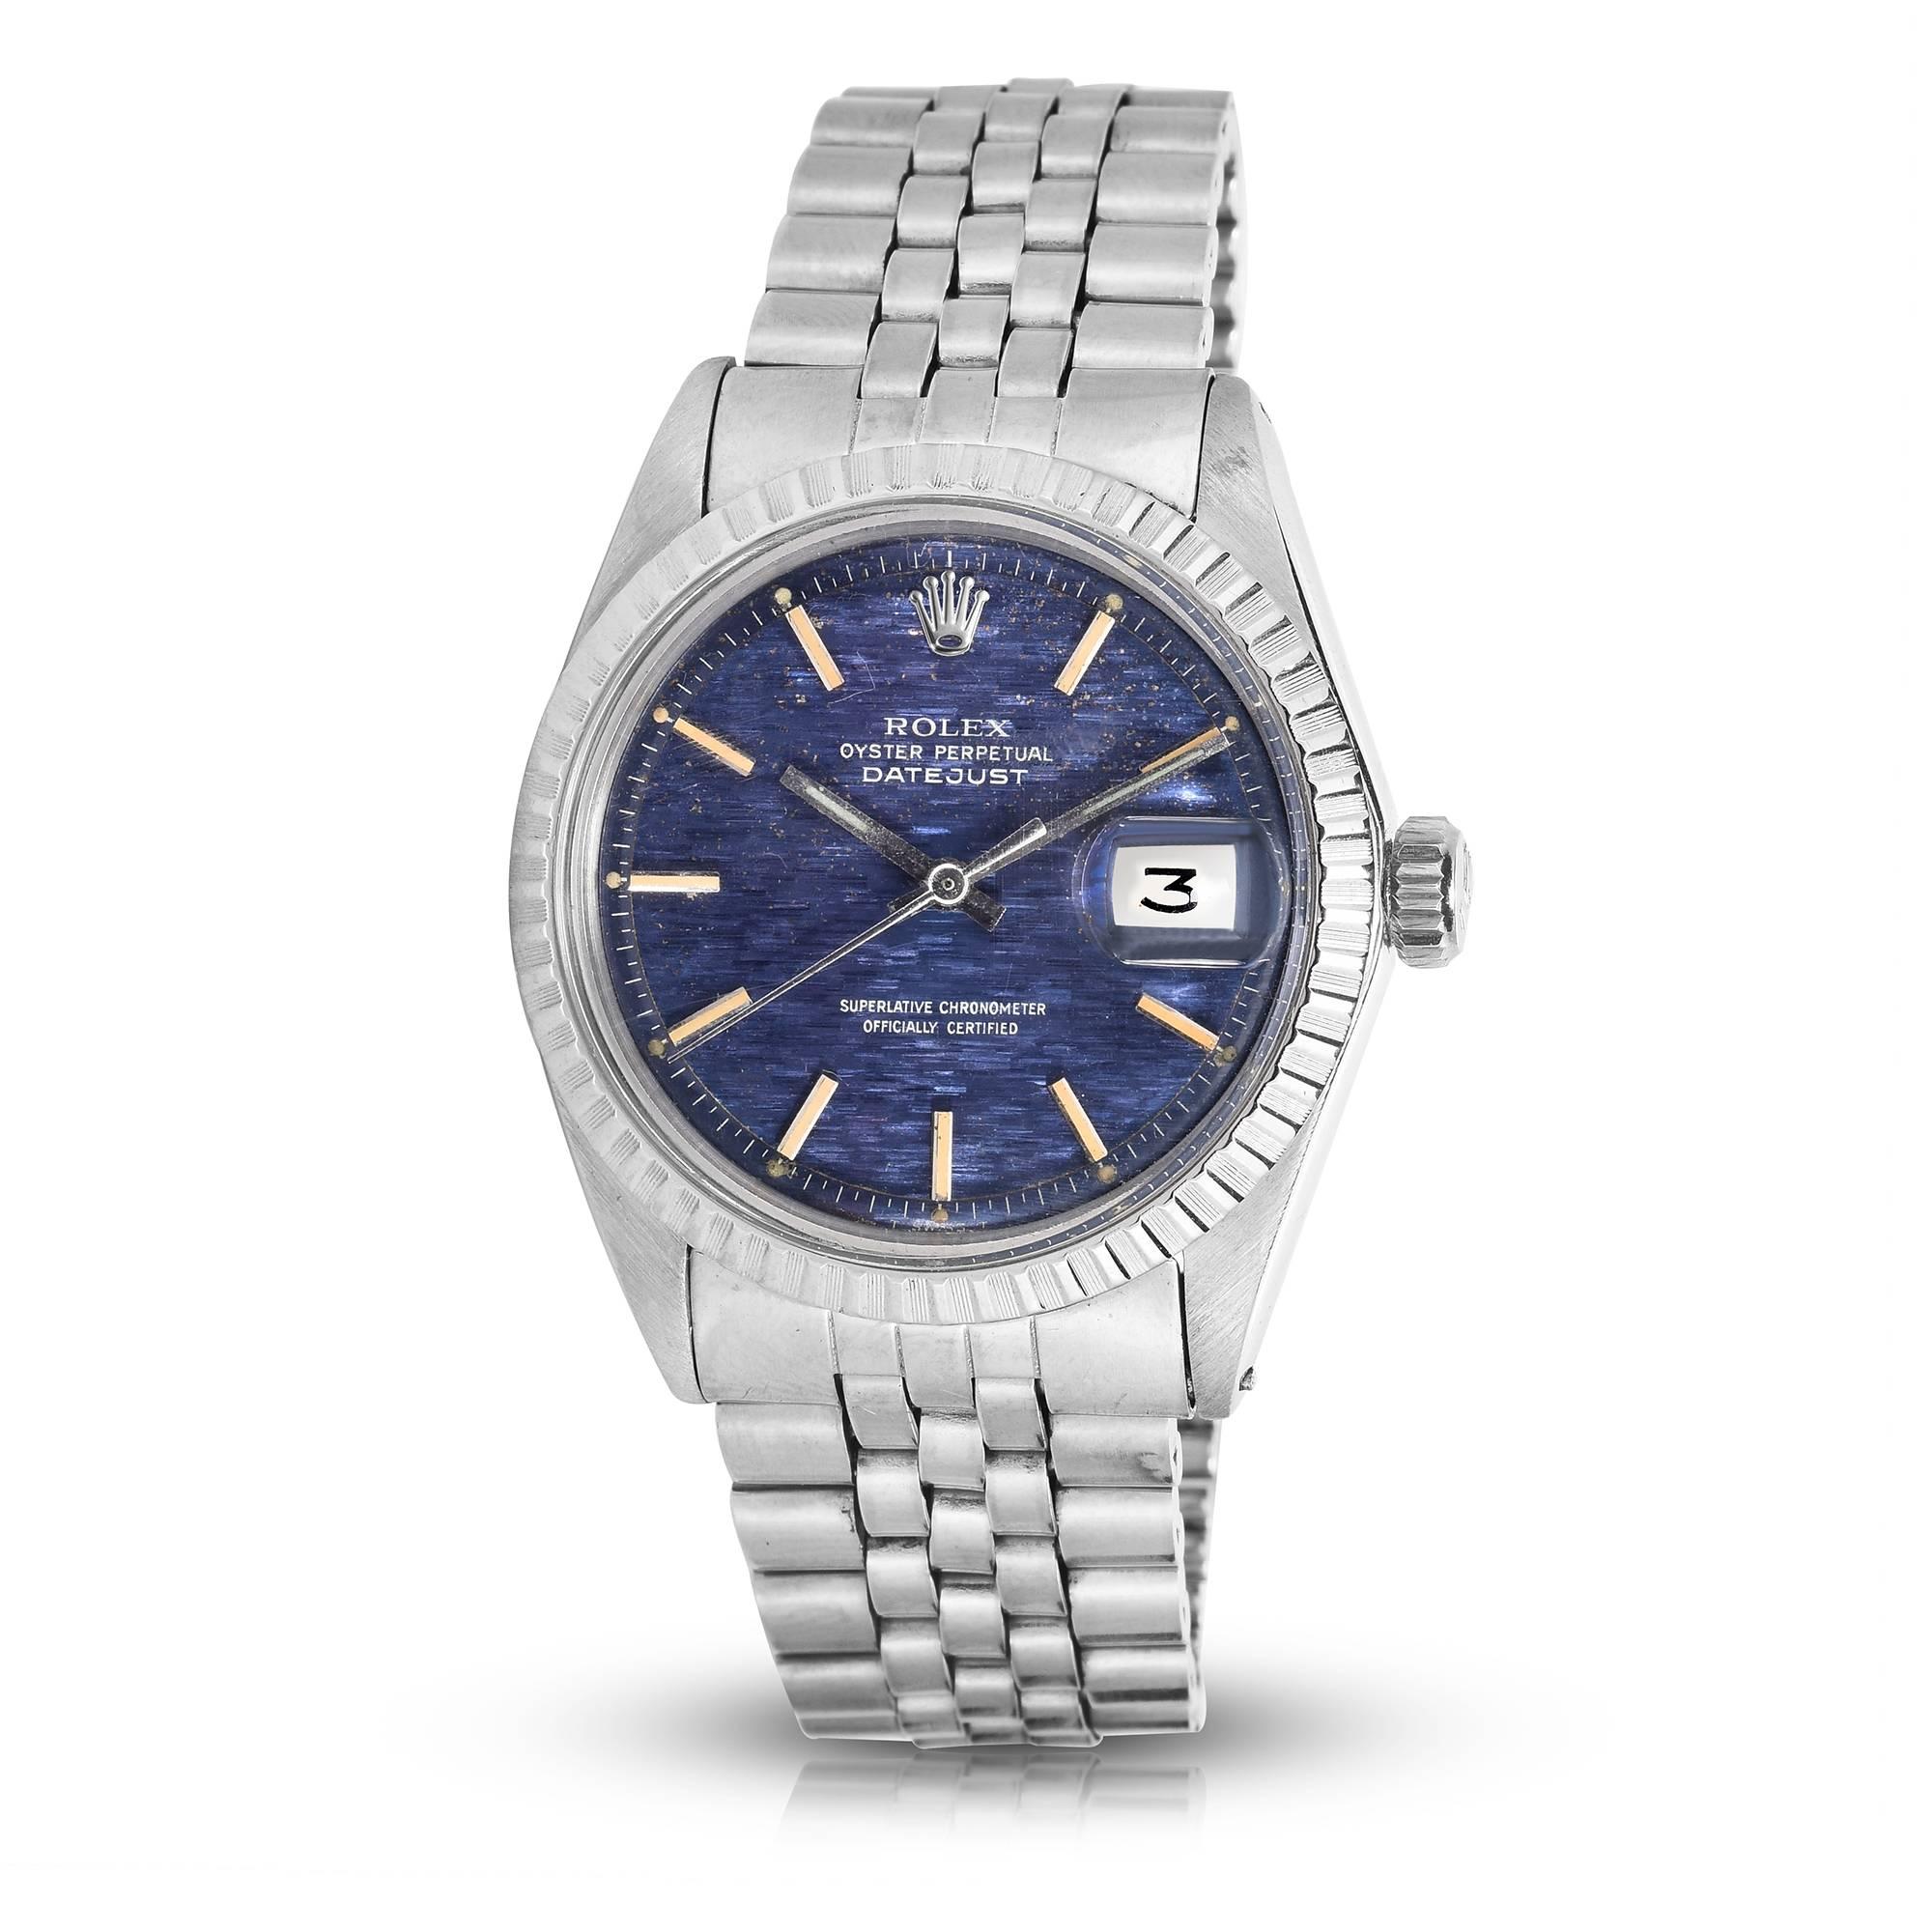 Rolex Stainless Steel Oyster Perpetual Datejust
Rare Blue Wave Dial with Applied Hour Markers with Patina
A True One Of A Kind Watch 
Stainless Steel Engine-Turned Bezel
36mm in size 
Plastic Crystal
From 1970
Comes Fitted on A Rolex